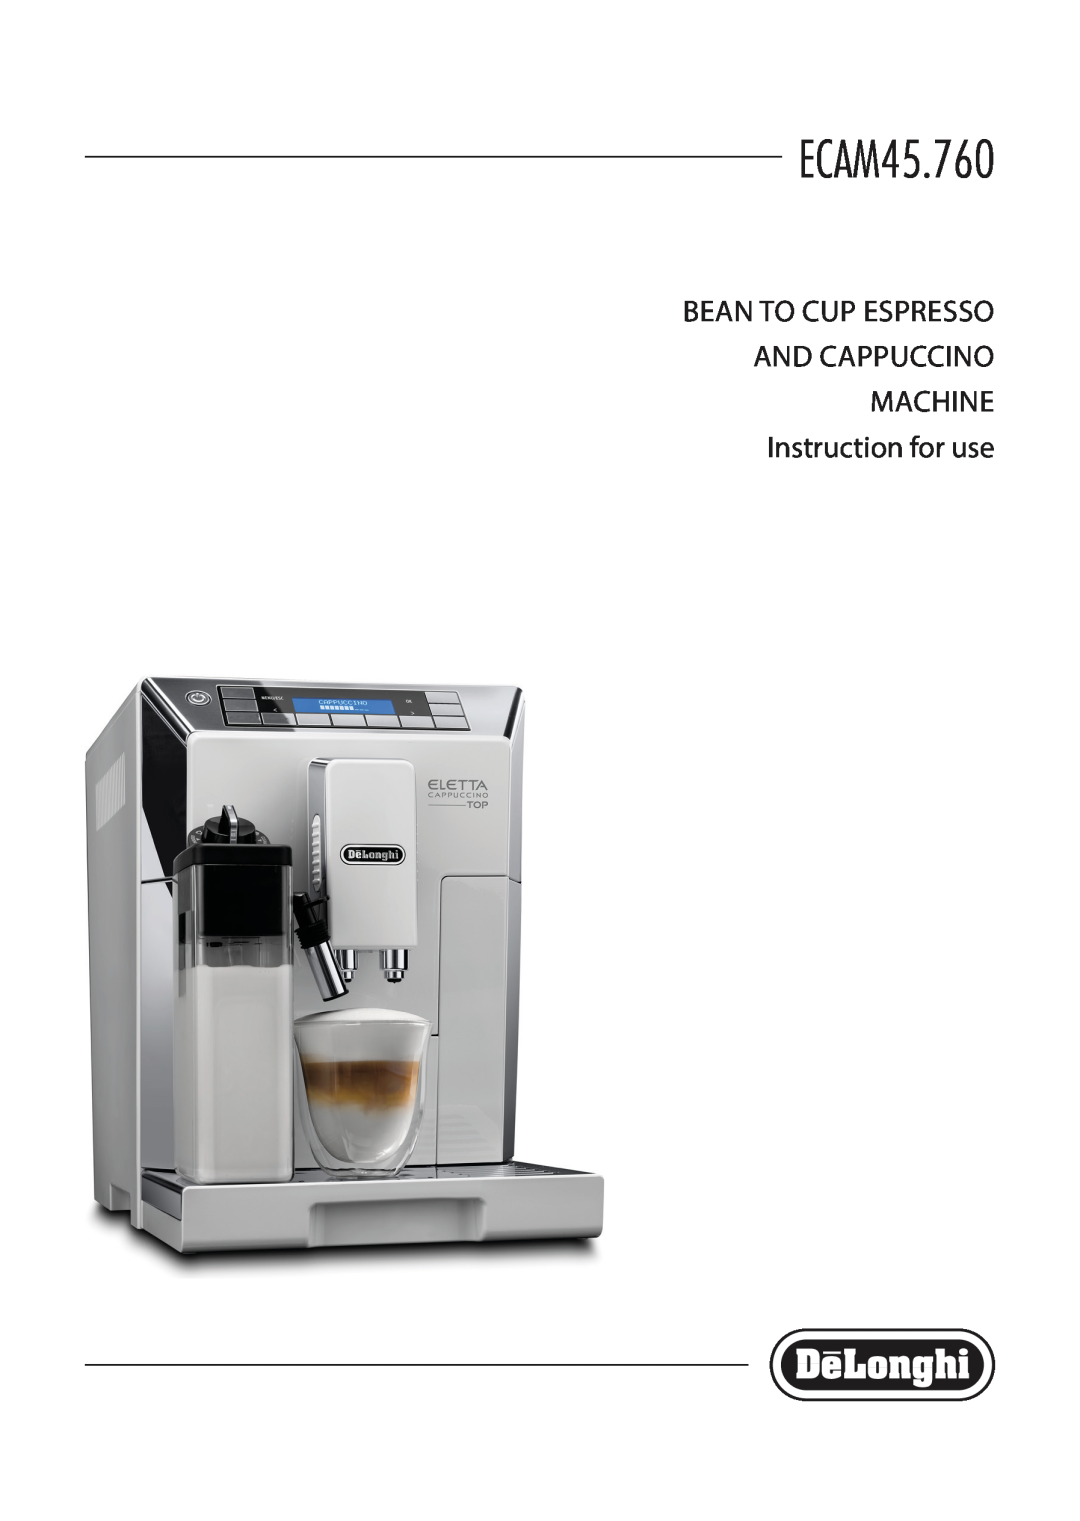 DeLonghi ECAM45.760 manual BEAN TO CUP ESPRESSO AND CAPPUCCINO MACHINE Instruction for use 